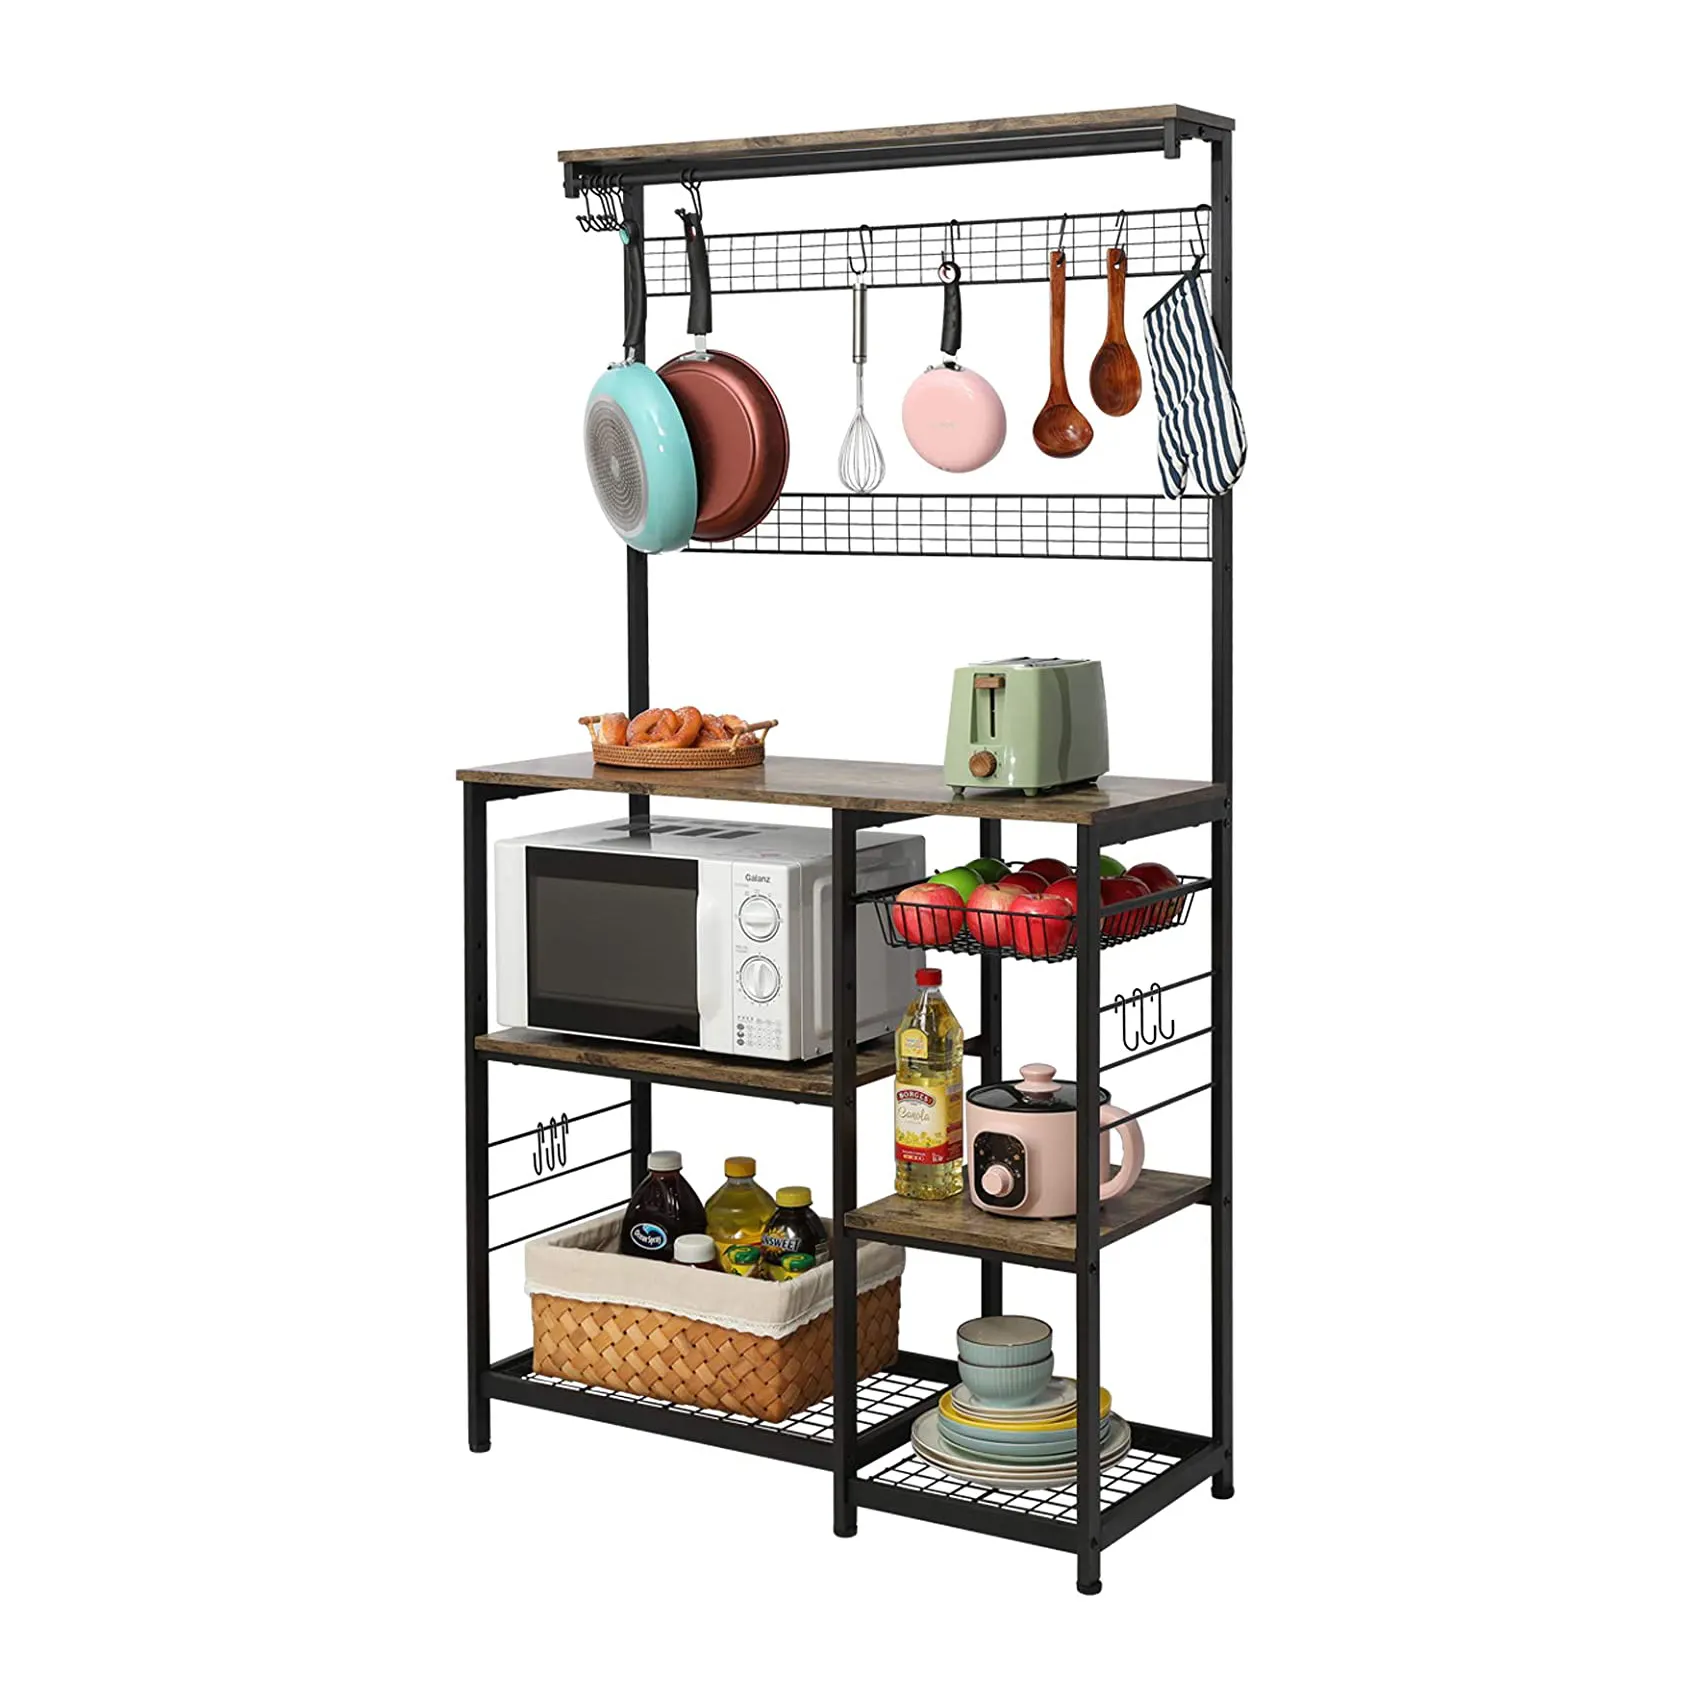 Kitchen Baker's Rack  68inch Microwave Stand with Pull-Out Wire Basket 23 Hooks 7 Tier Utility